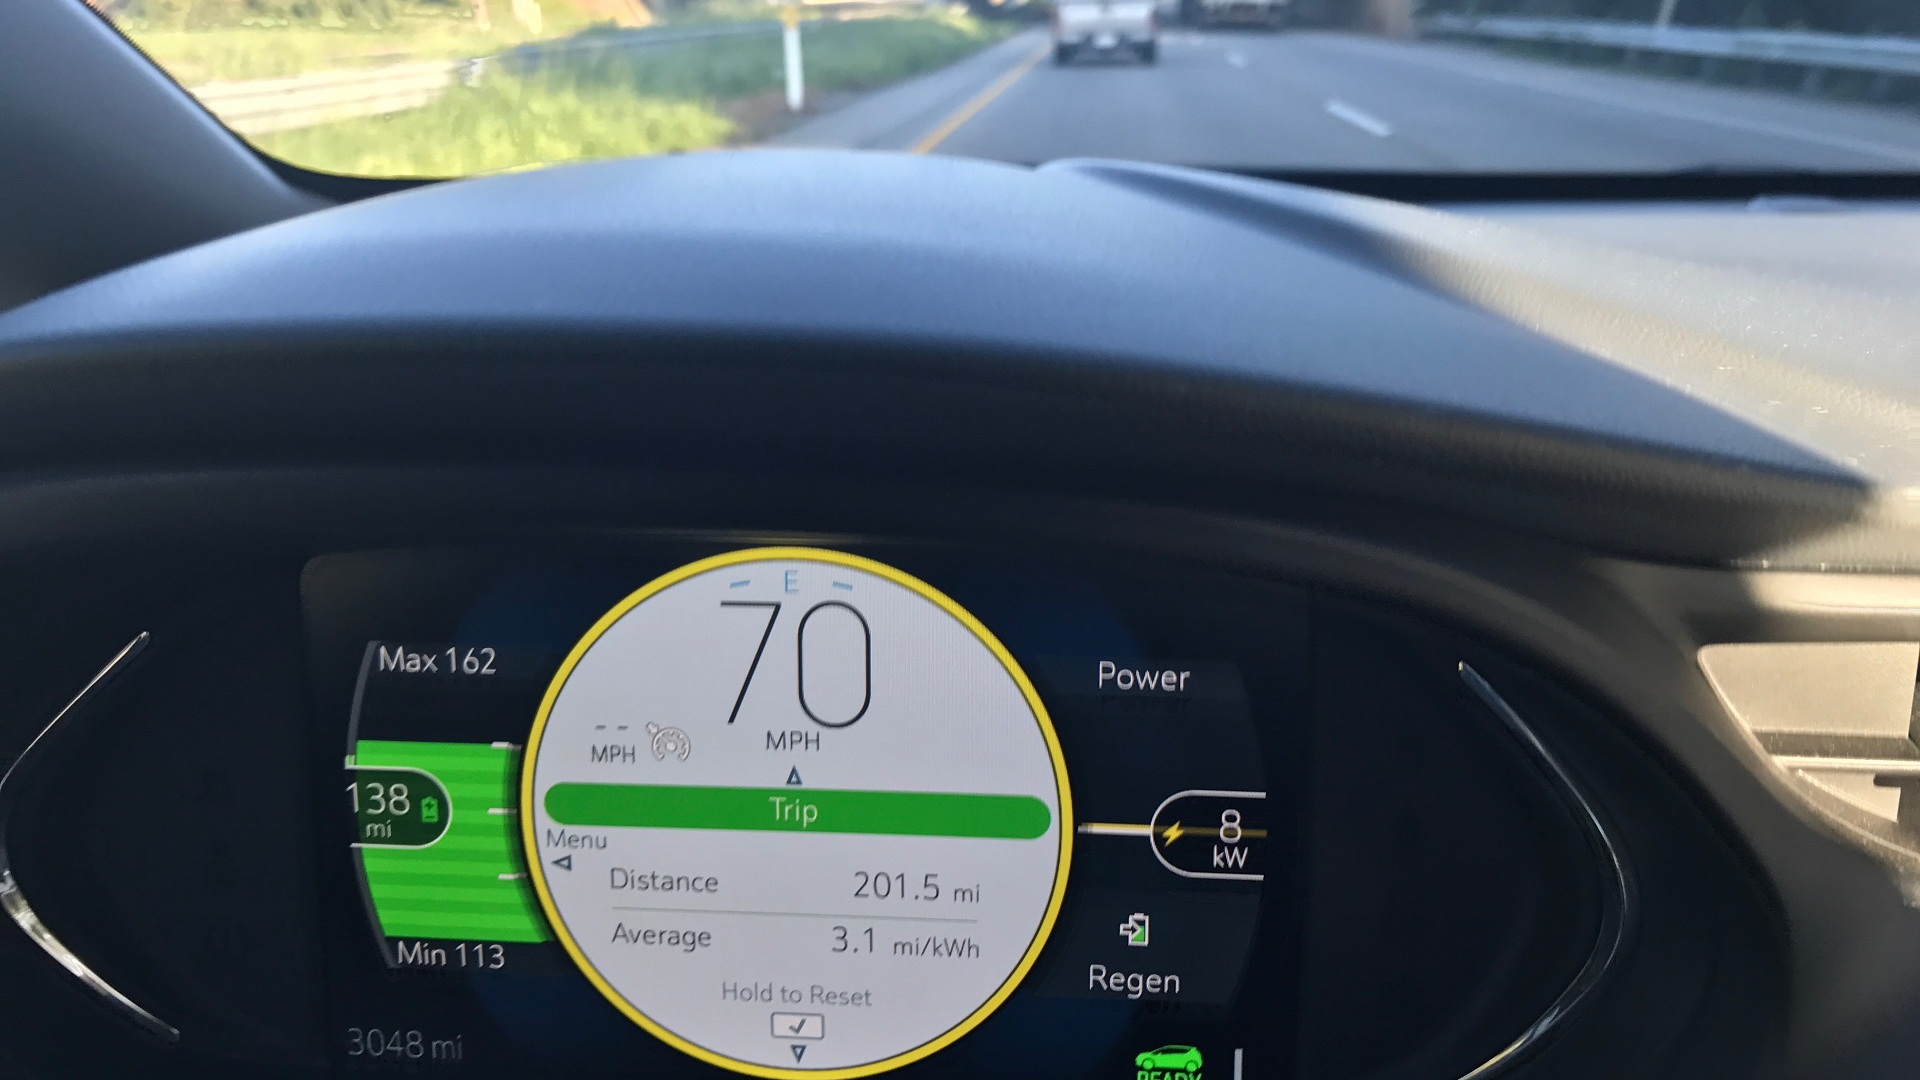 Energy efficiency and distance covered in 2017 Chevrolet Bolt EV road trip by owner Dawn Hall